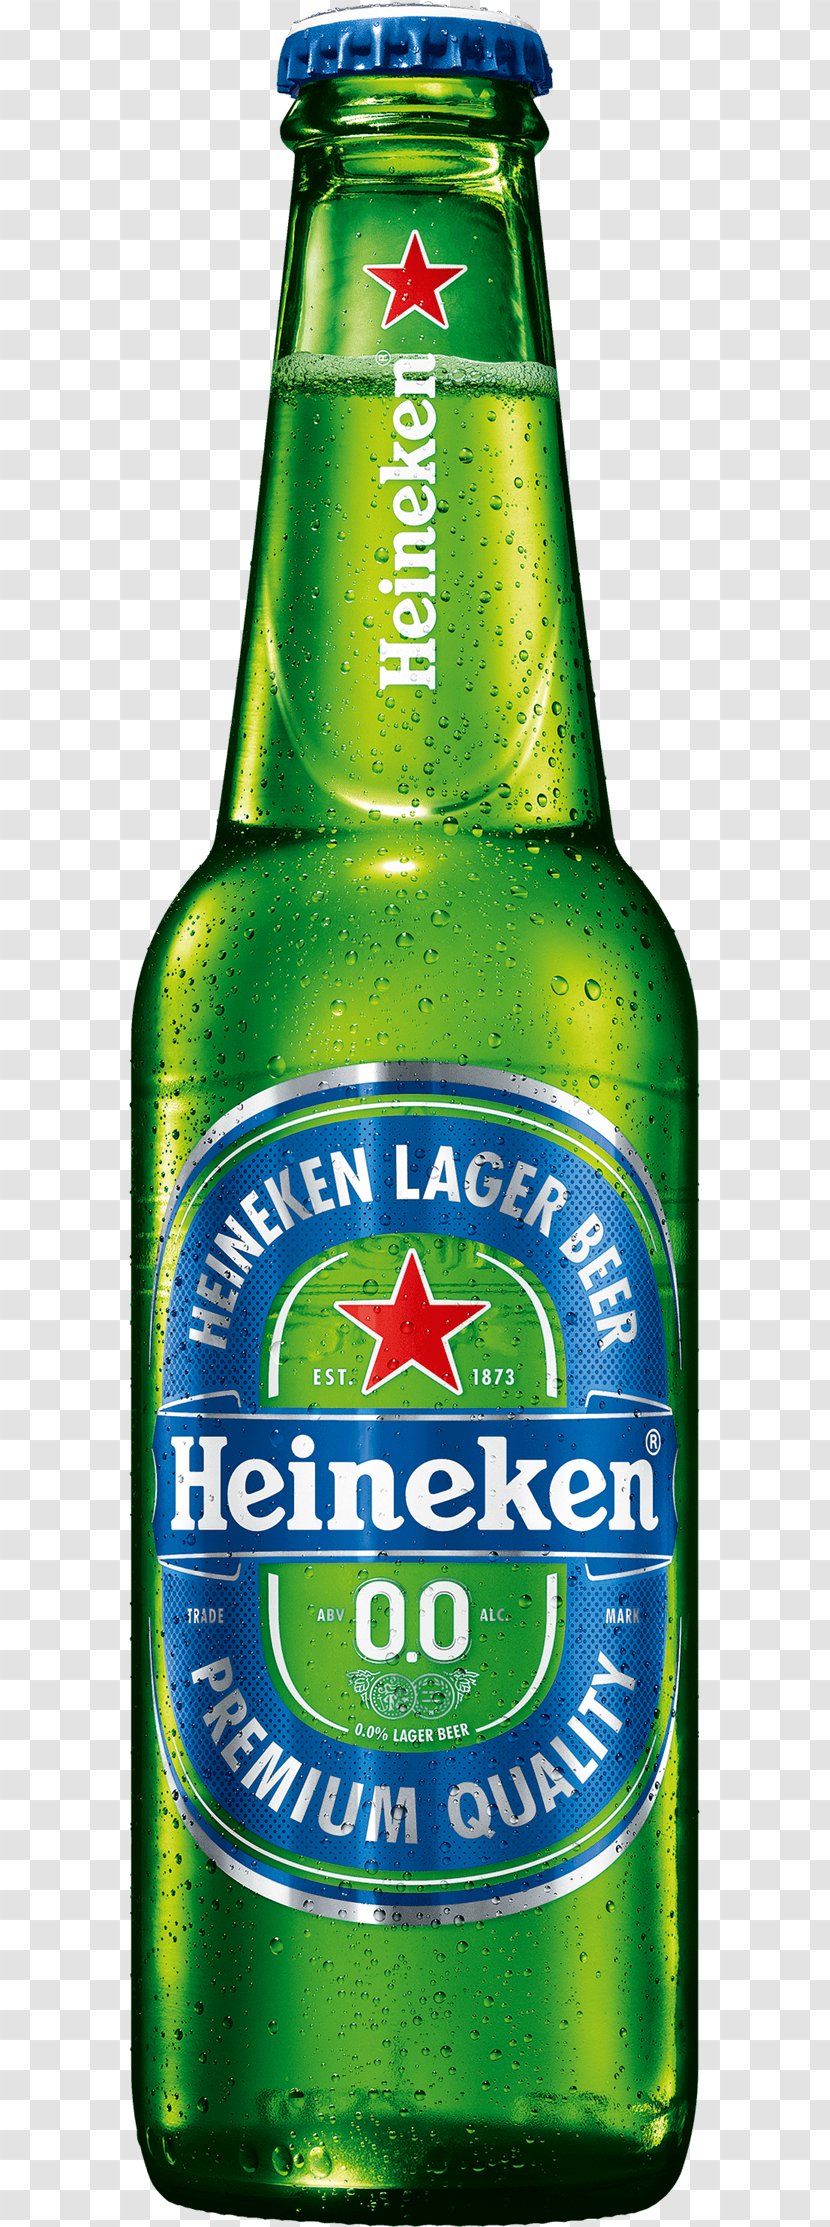 Heineken 0.0 Alcohol Free Beer Lager Non-alcoholic Drink - 00 Transparent PNG